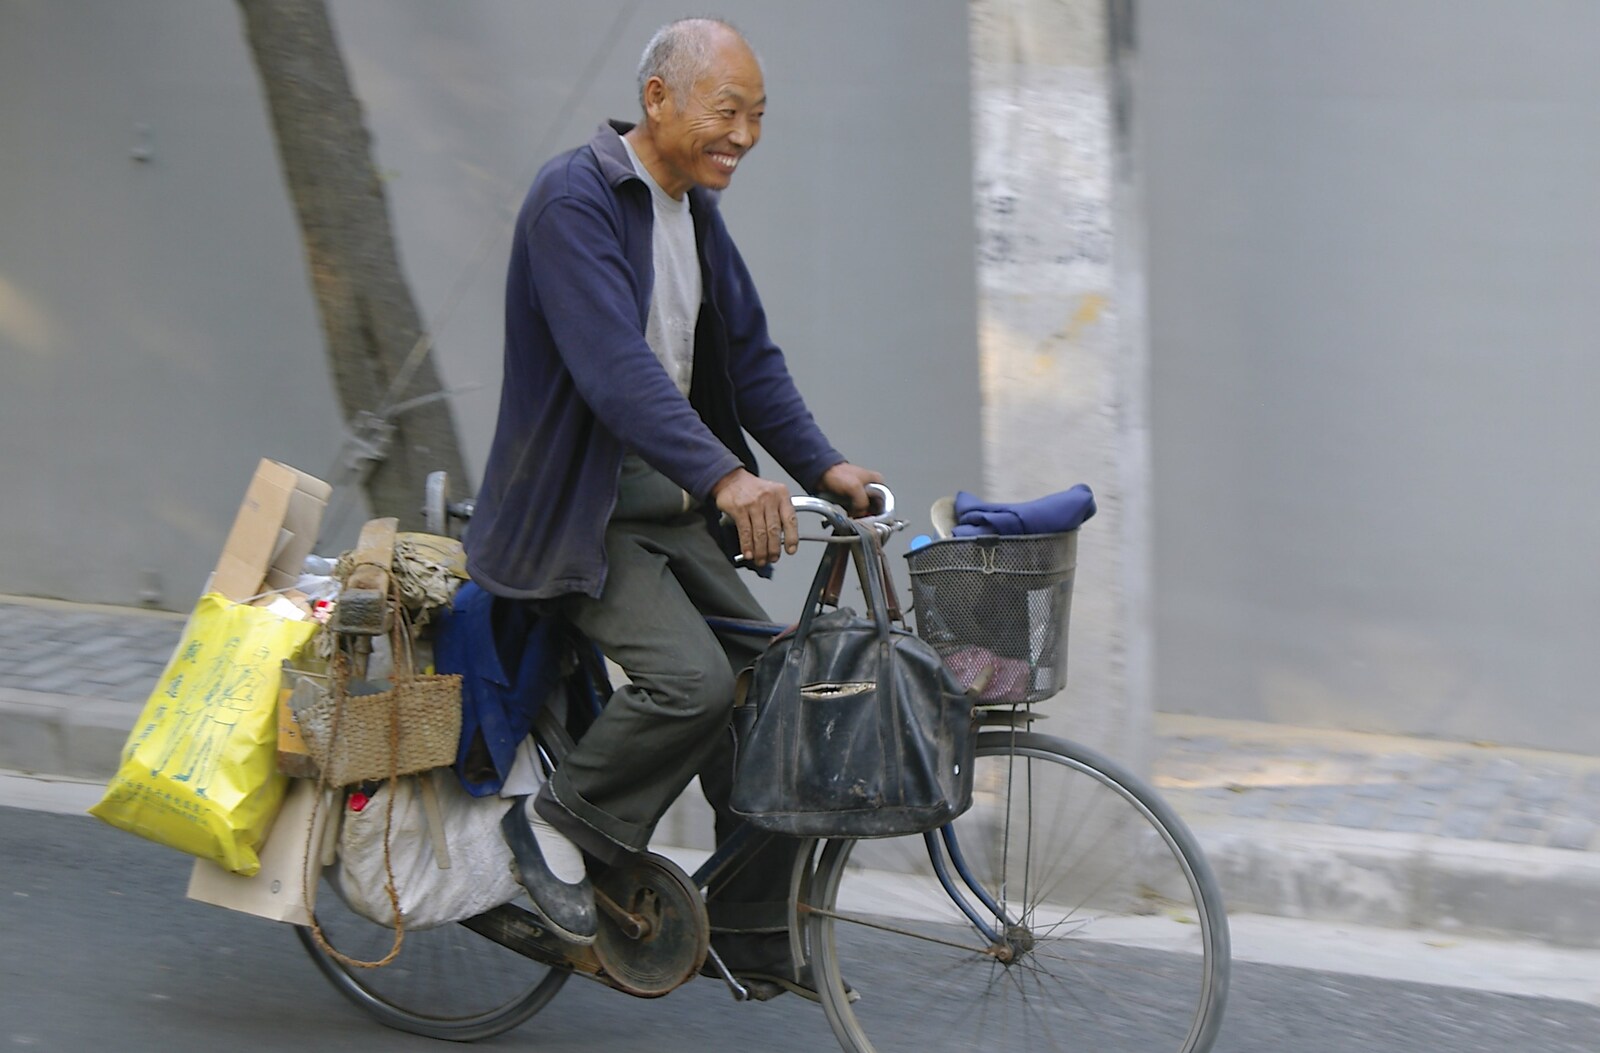 Some guy on his bike, loaded with the weekly shop from A Few Days in Nanjing, Jiangsu Province, China - 7th October 2006